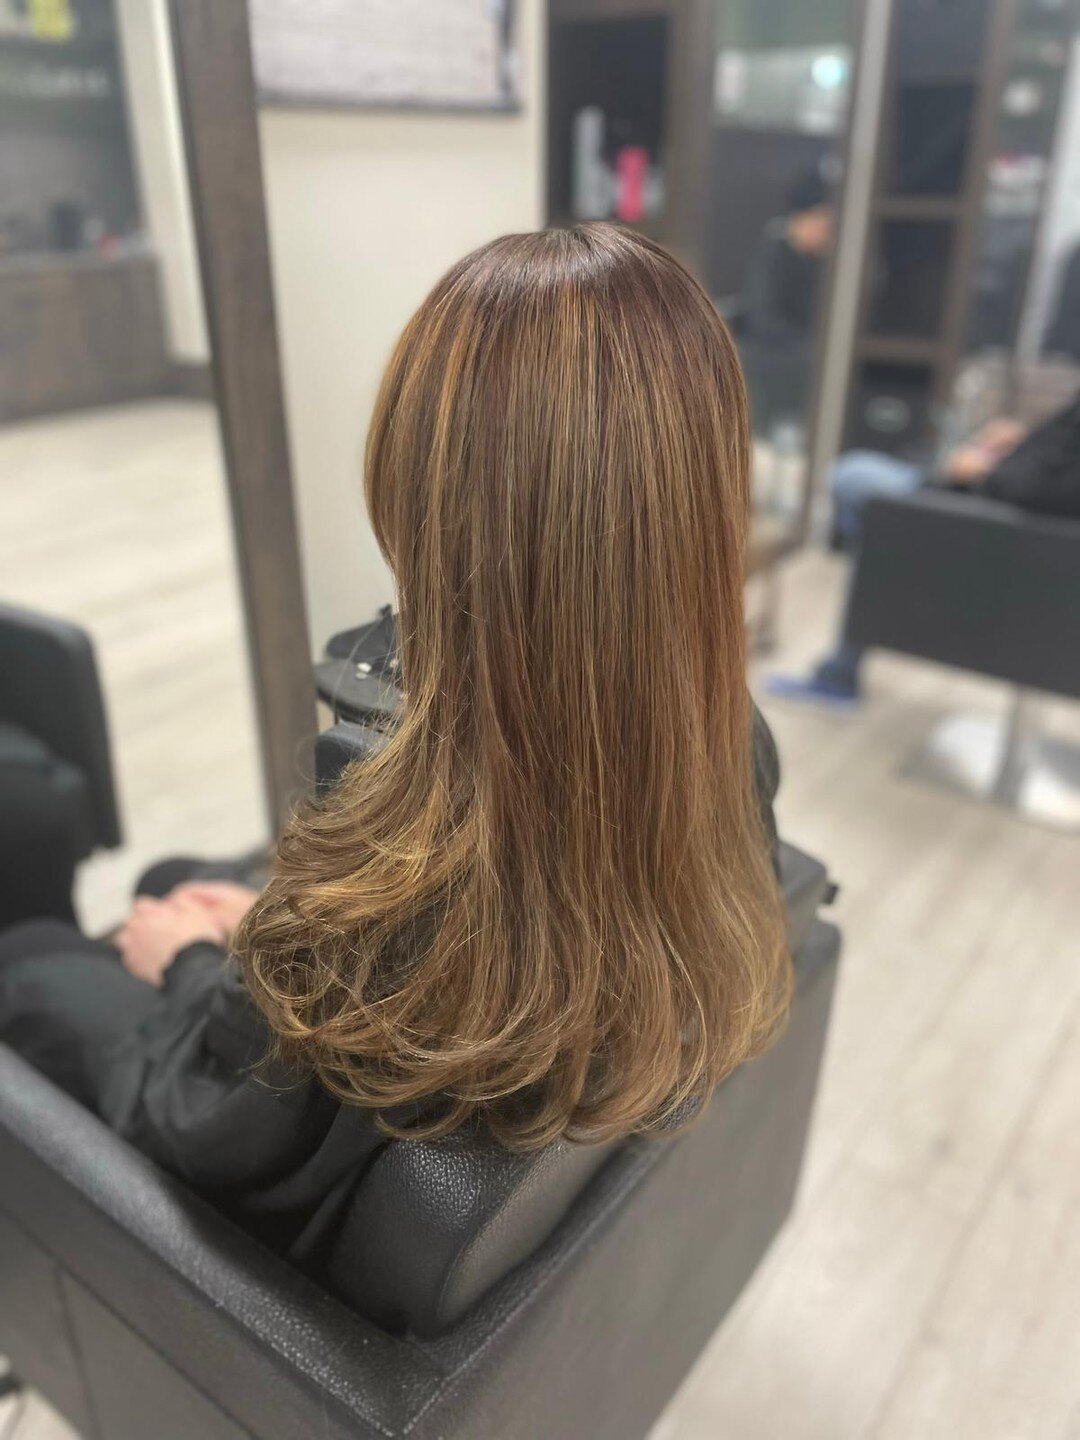 Some new hair just in time for the weekend 🙌

#dothairliverpool #lorealpro #lorealpro #iamahairartist #iamahairartistwin #frenchbalayage #frenchglossing #liverpoolsalon #liverpoolhair #liverpoolhairdressers #liverpoolstylists #liverpoolbeauty #liver